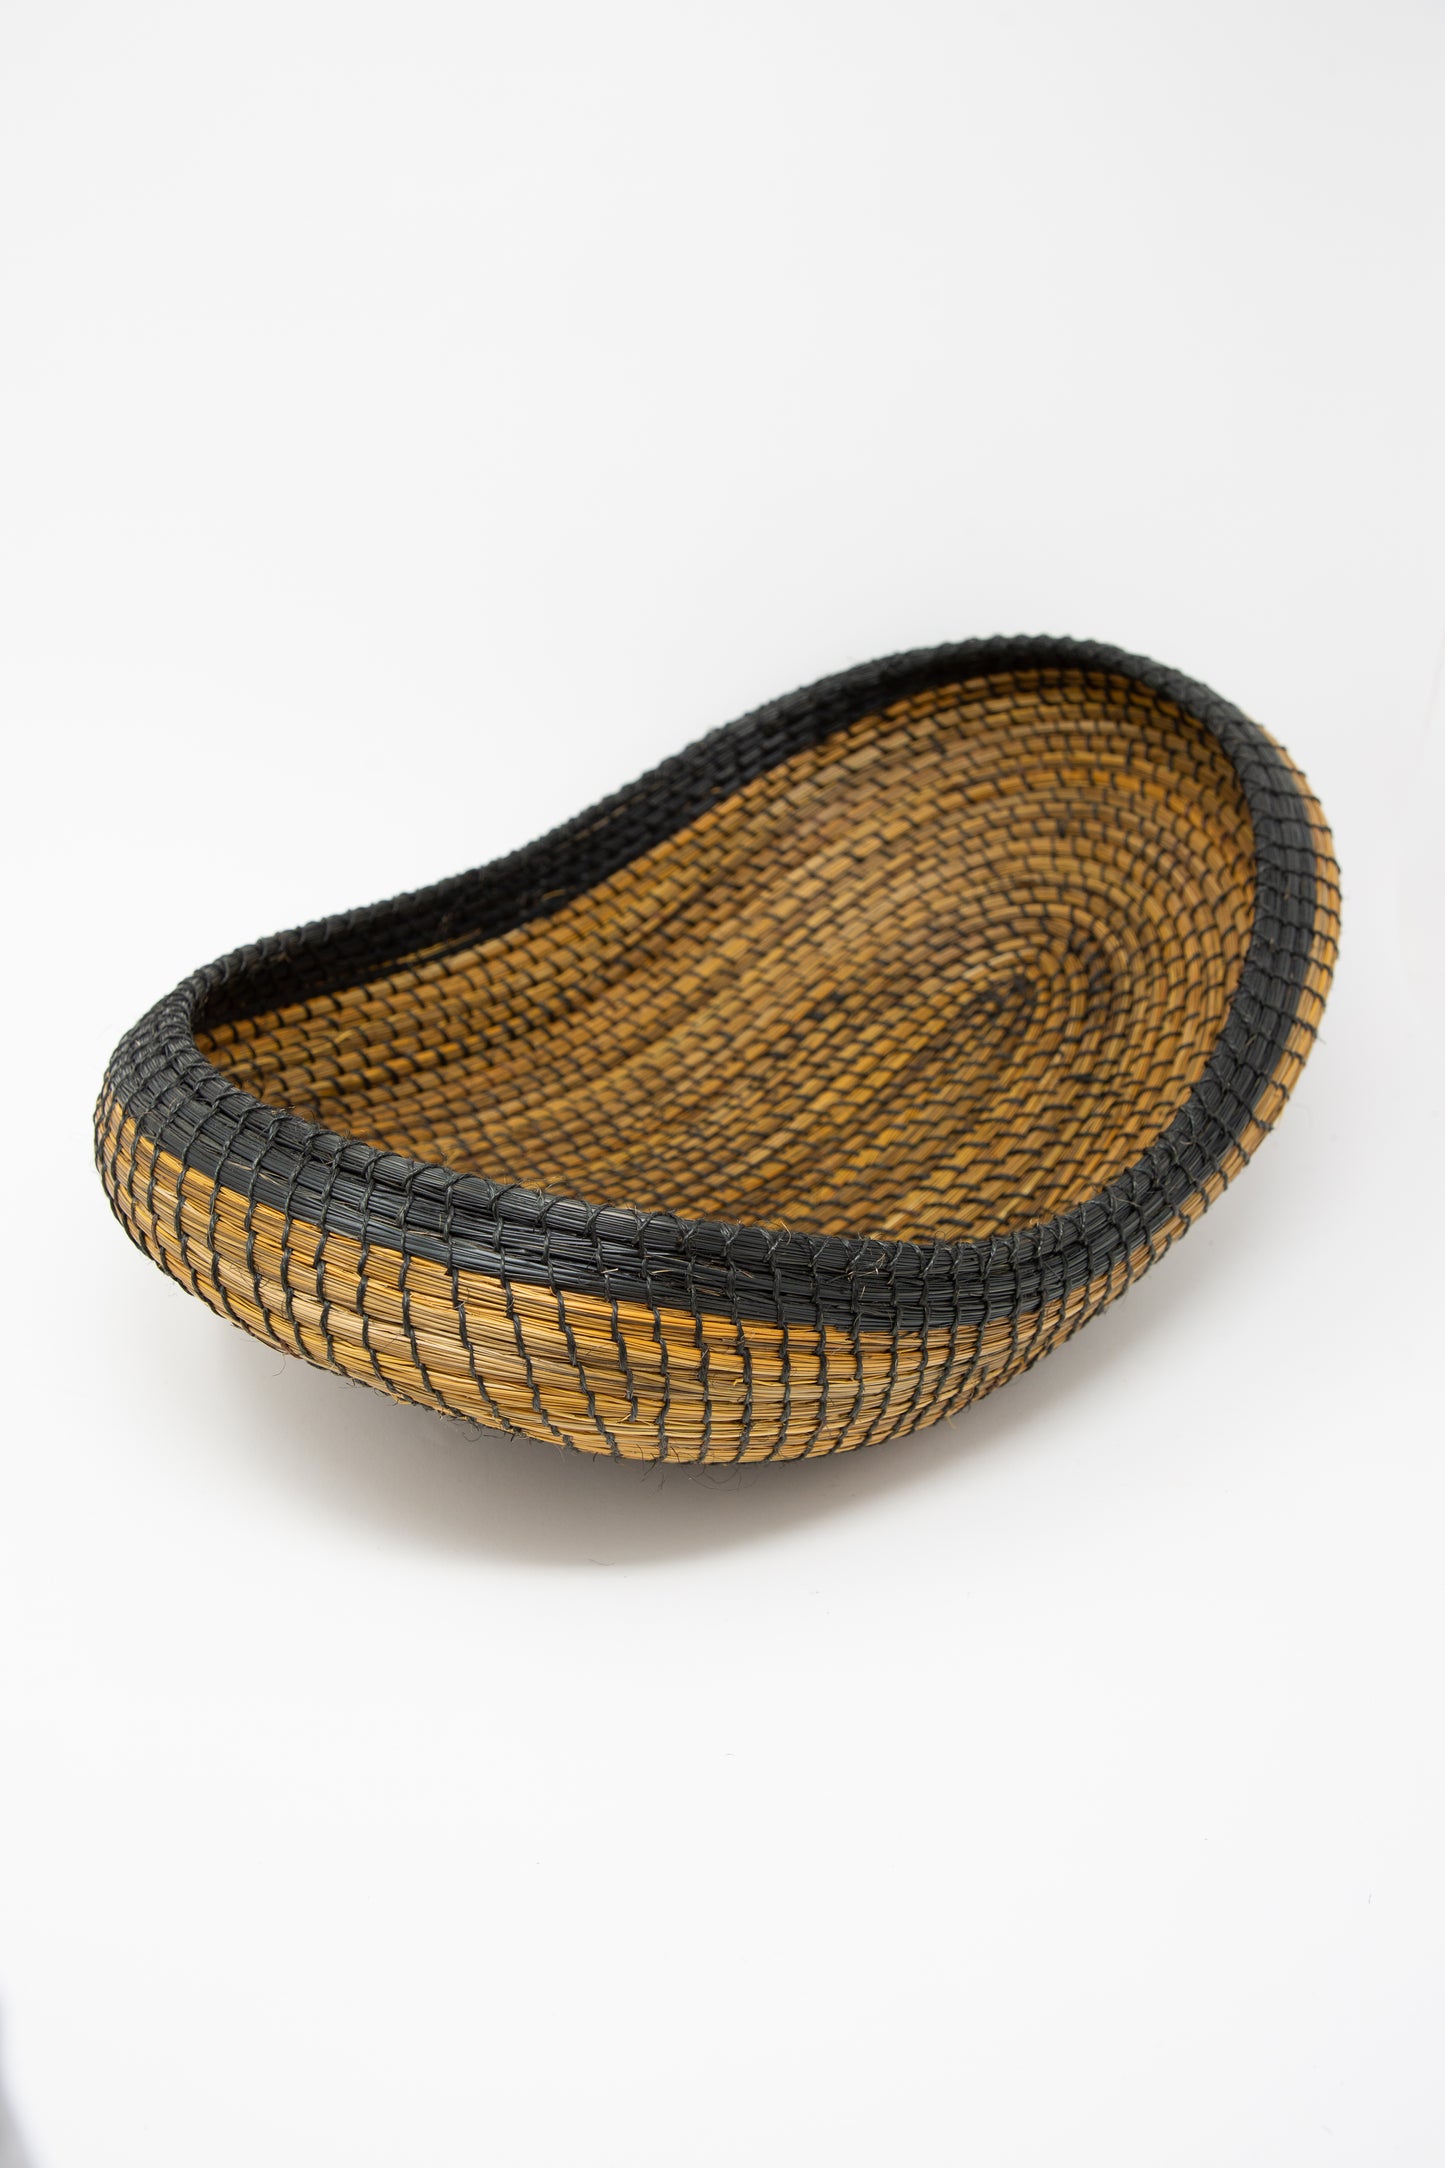 A black and brown Asopafit Canoe Basket by Plaza Bolivar, showcasing traditional weaving skills from Colombia, sits on a white surface.